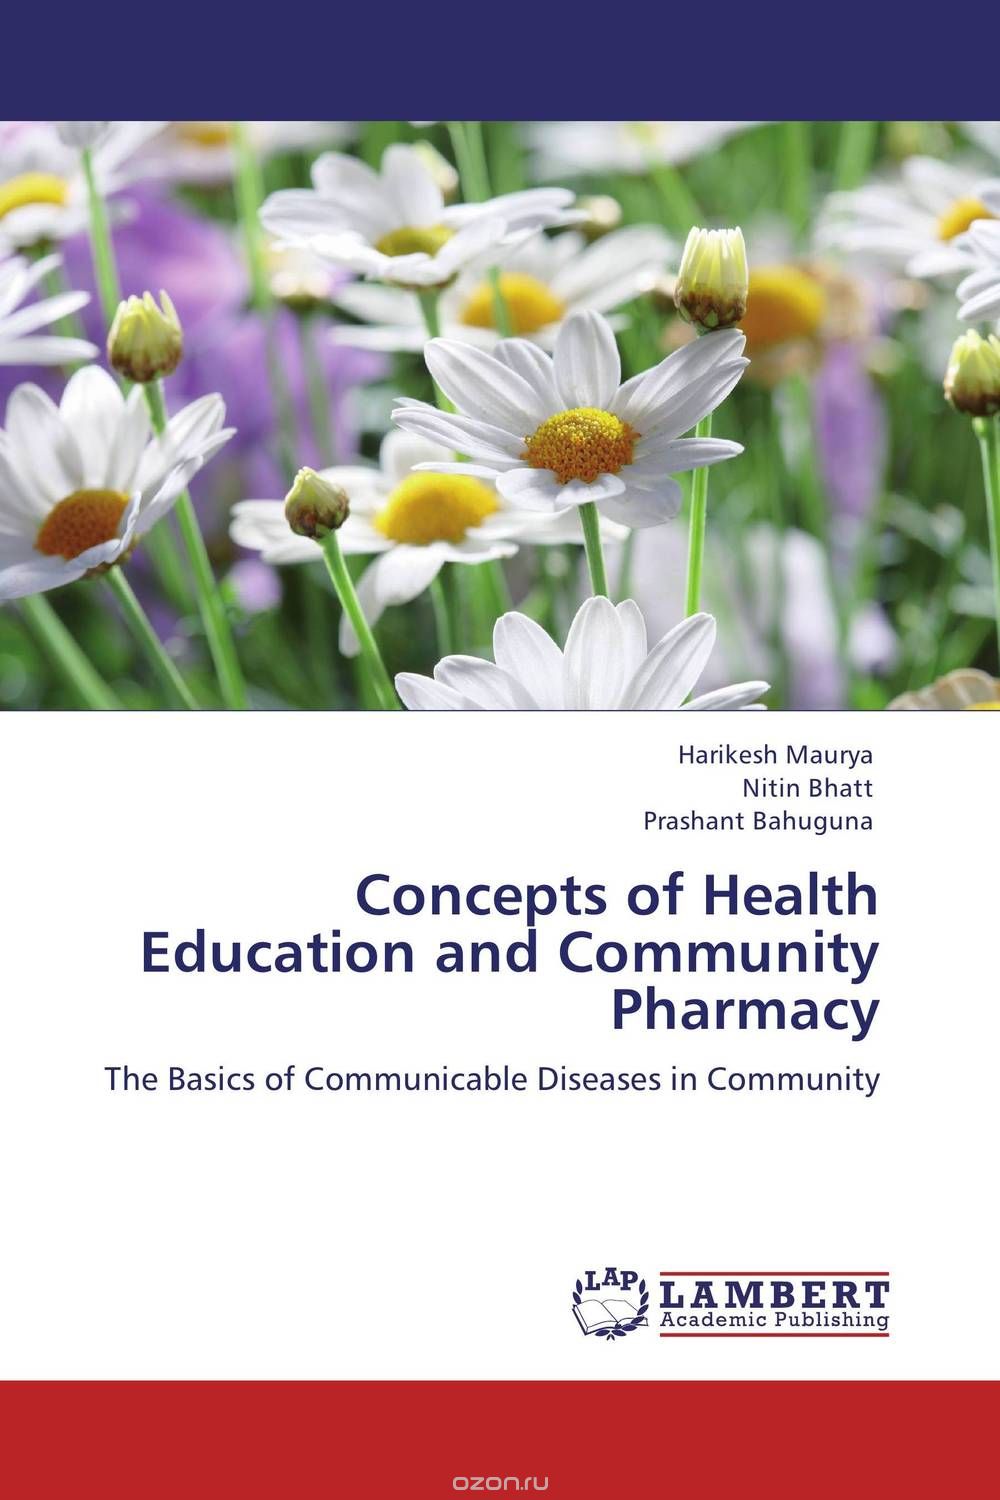 Concepts of Health Education and Community Pharmacy